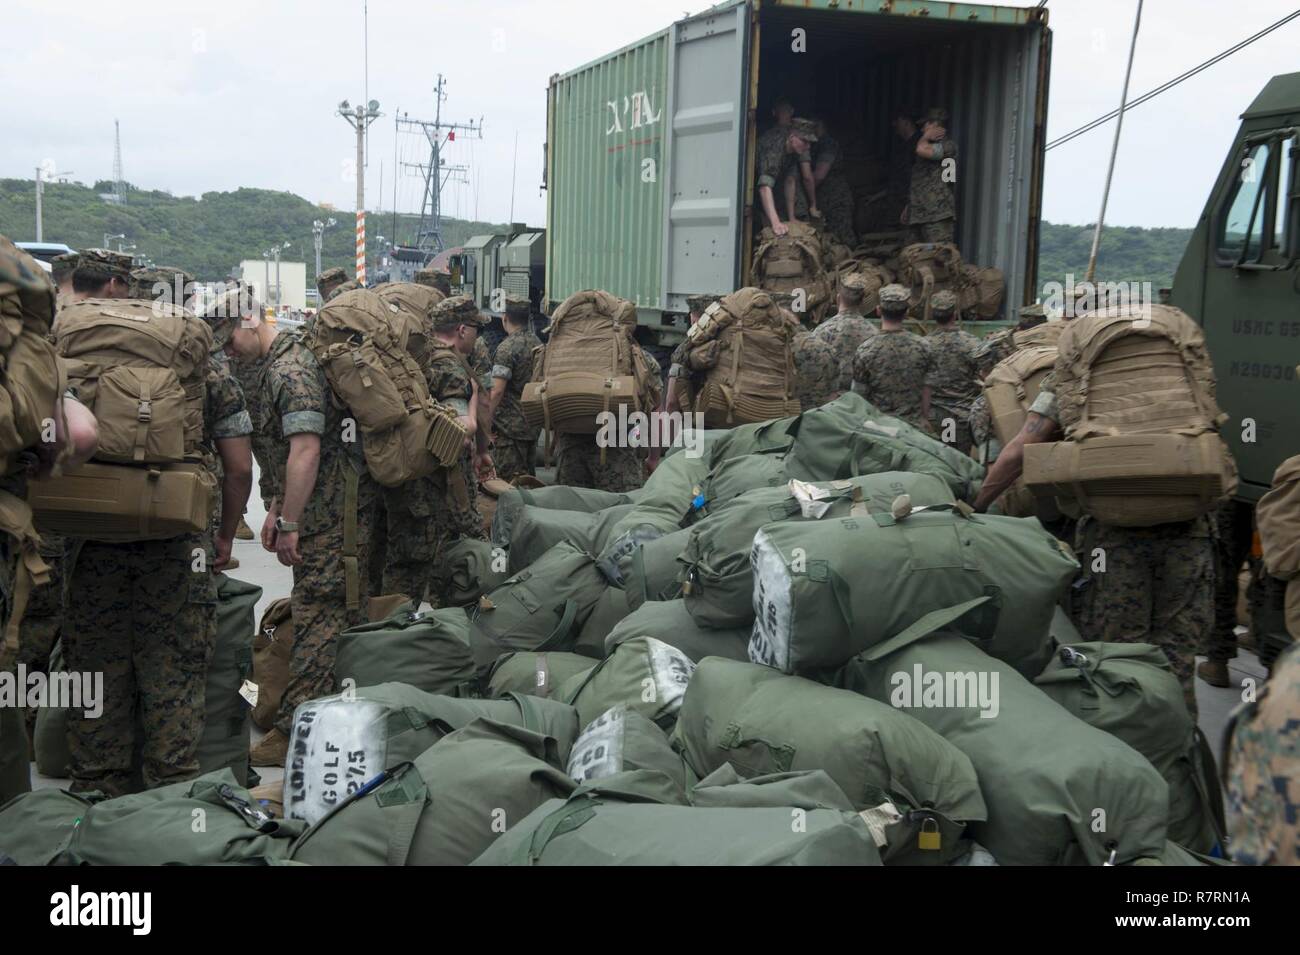 WHITE BEACH, Okinawa (April 6, 2017) Marines, assigned to the 31st Marine Expeditionary Unit (MEU), load gear into a logistic vehicle system replacement (LVSR) during an offload from the amphibious assault ship USS Bonhomme Richard (LHD 6). Bonhomme Richard, flagship of the Bonhomme Richard Amphibious Ready Group is on a patrol, operating in the Indo-Asia-Pacific region to enhance warfighting readiness and posture forward as a ready-response force for any type of contingency. Stock Photo